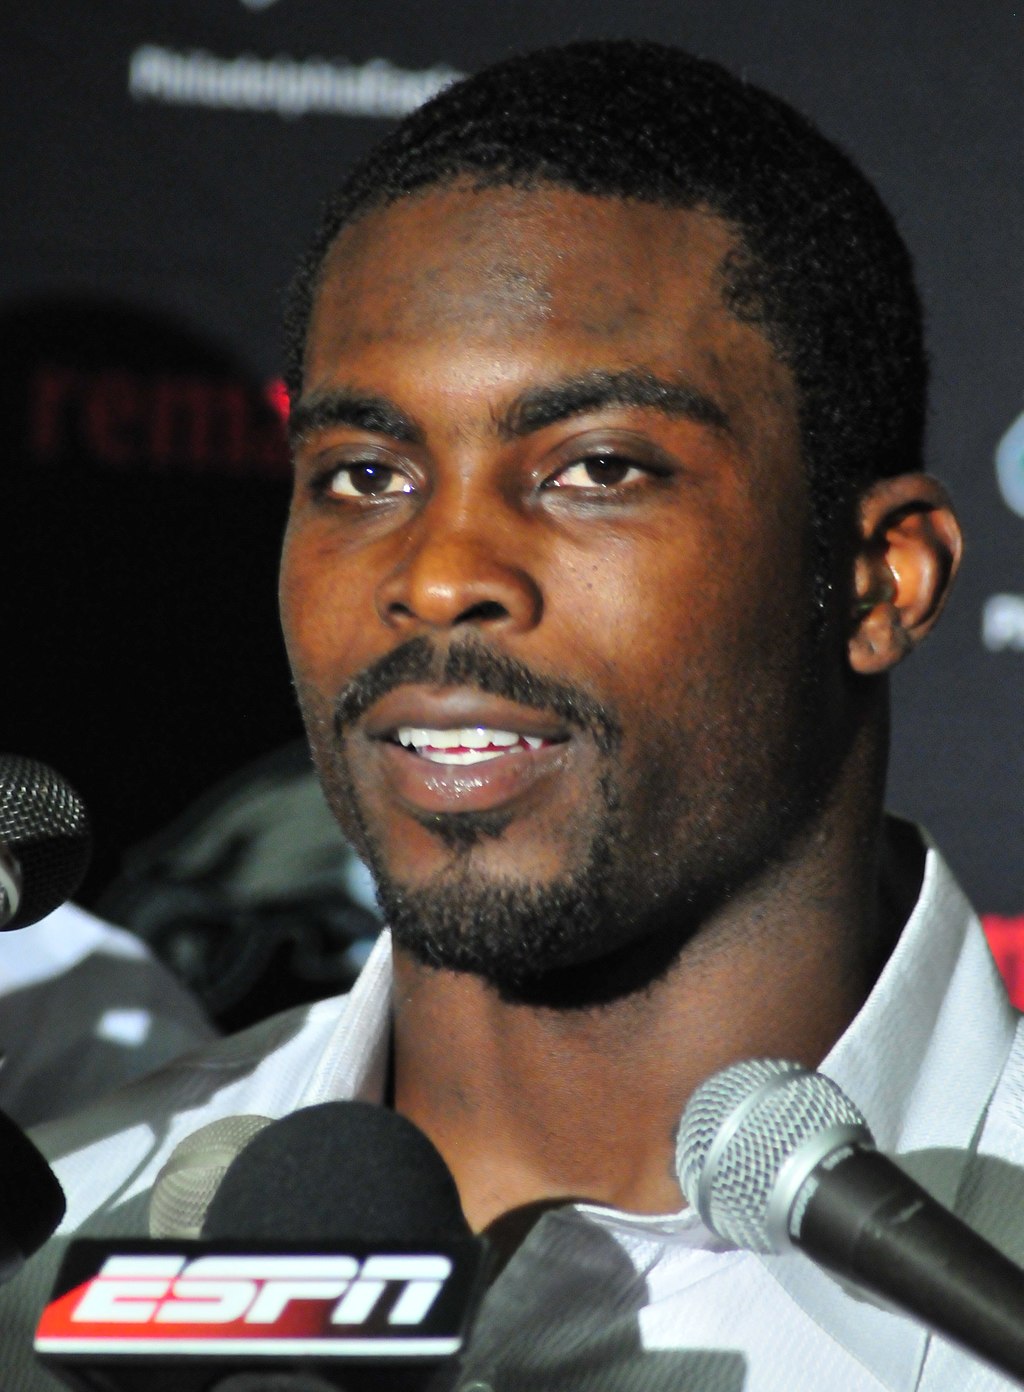 Michael Vick Spoke About Redemption and Animal Rights At Liberty University